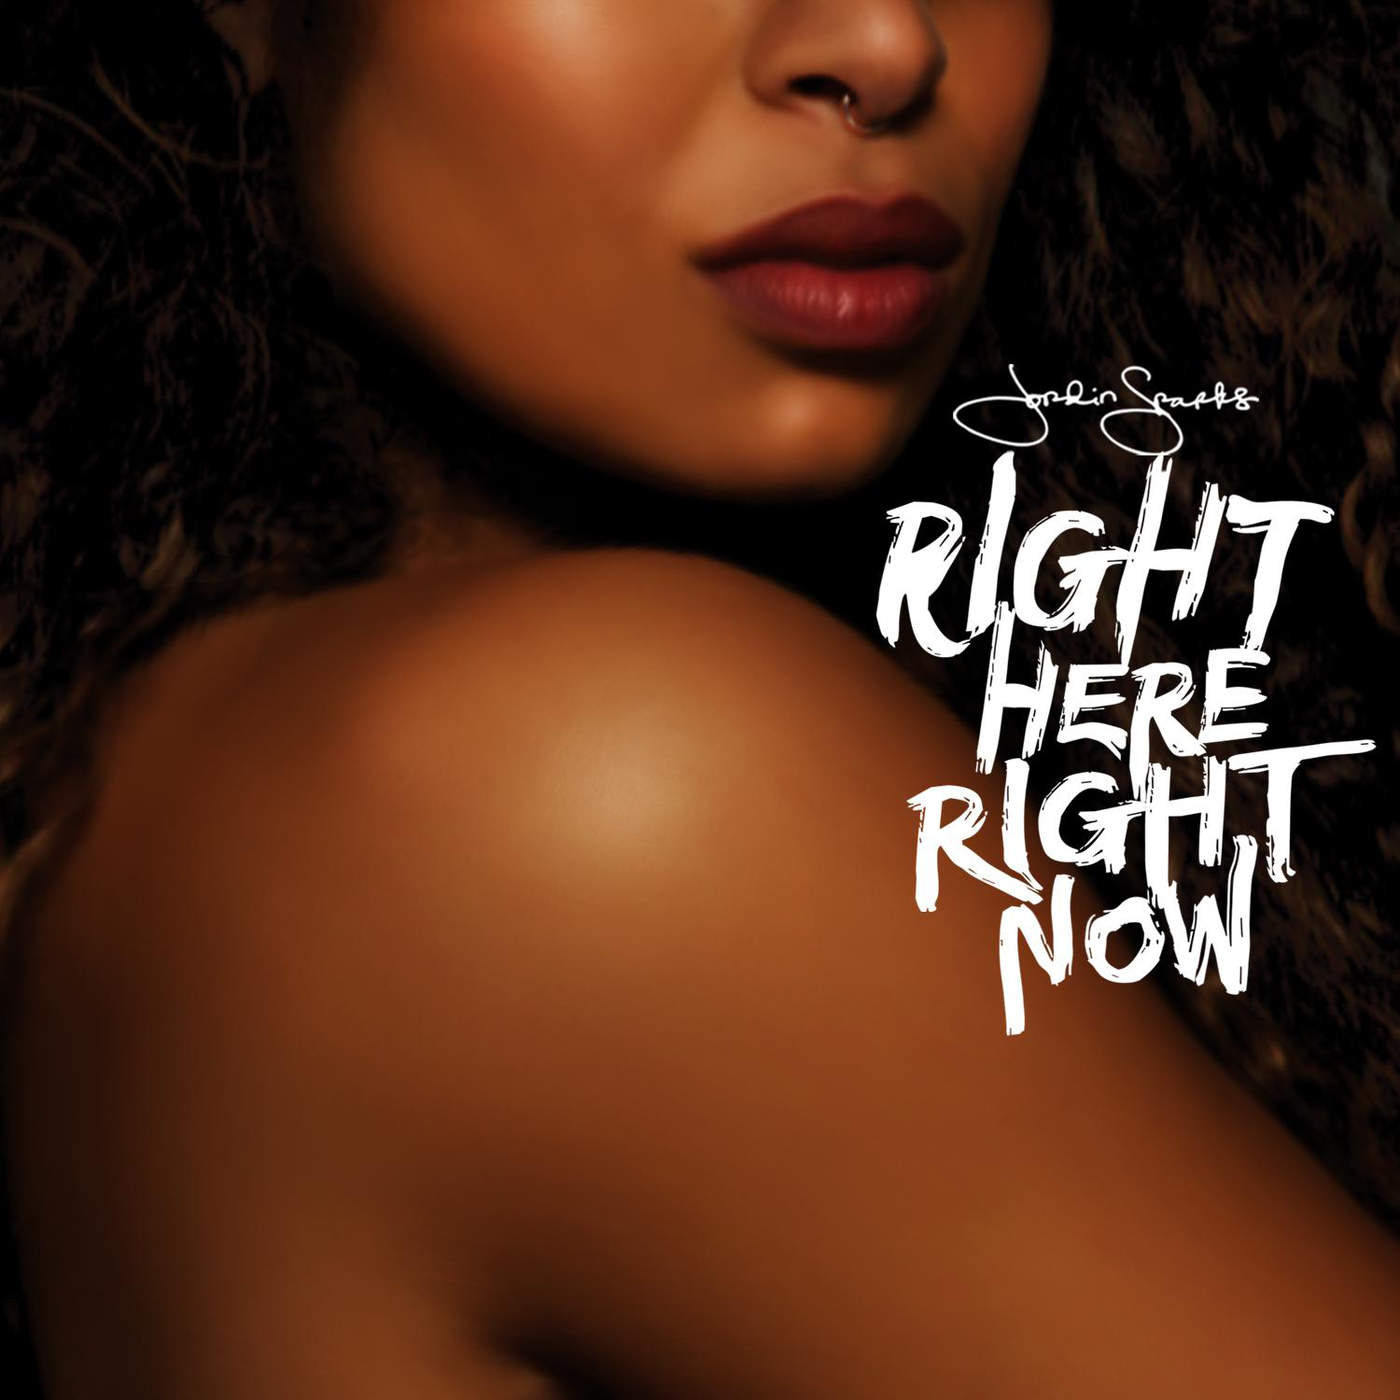 Jordin Sparks – Right Here Right Now Free Download cover